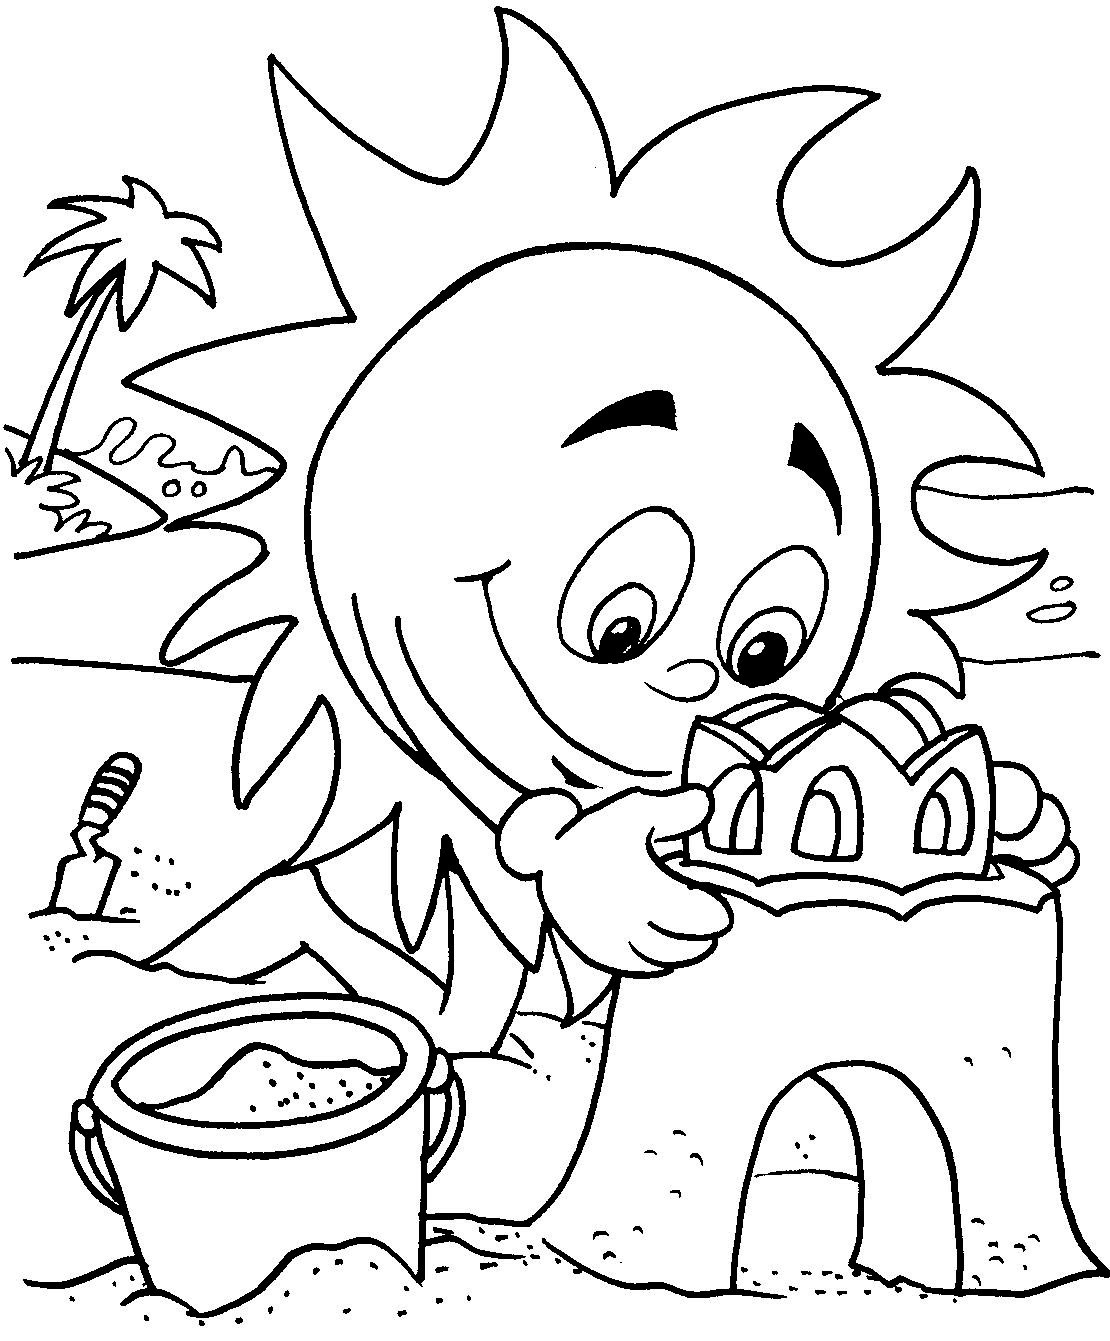 Summer Coloring Pages For Kids. Print Them All For Free. - Free Printable Summer Coloring Pages